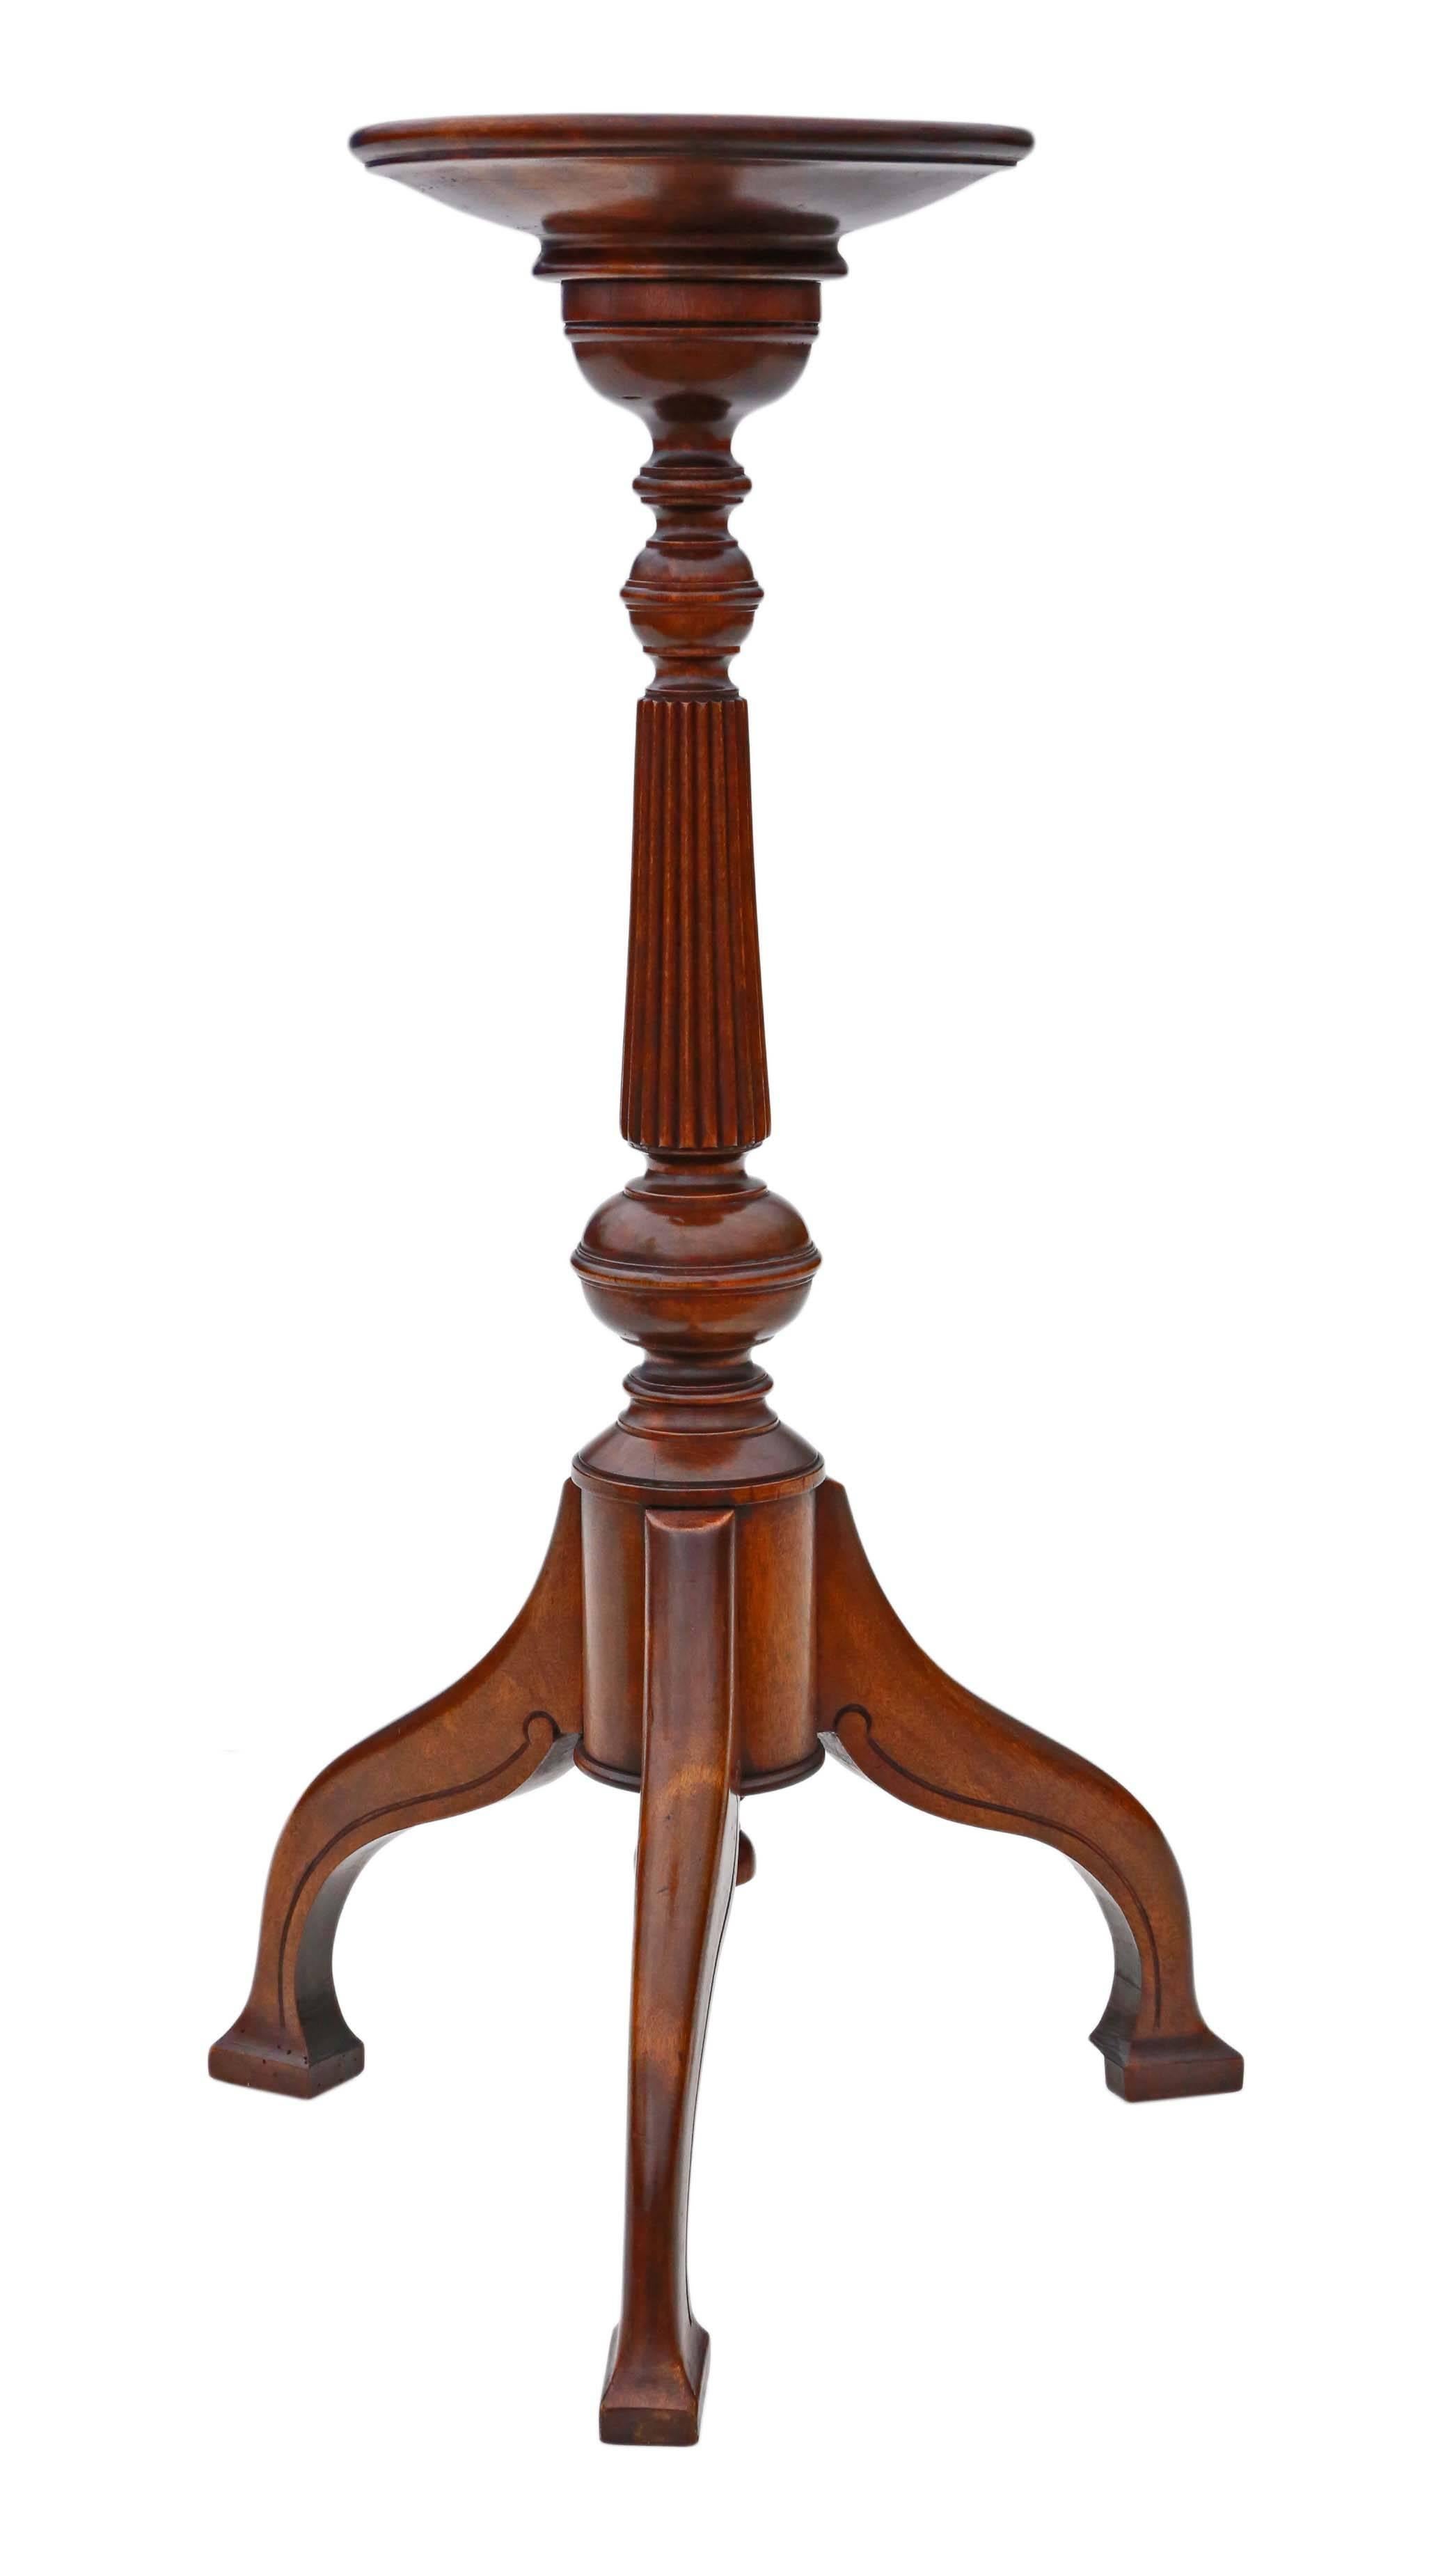 Antique quality beech Art Nouveau circa 1900 torchiere / Jardinière pedestal plant stand.

This is a quality item, solid and heavy, with no loose joints. Very stabile.

A rare attractive piece.

Good age and patina, would look amazing in the